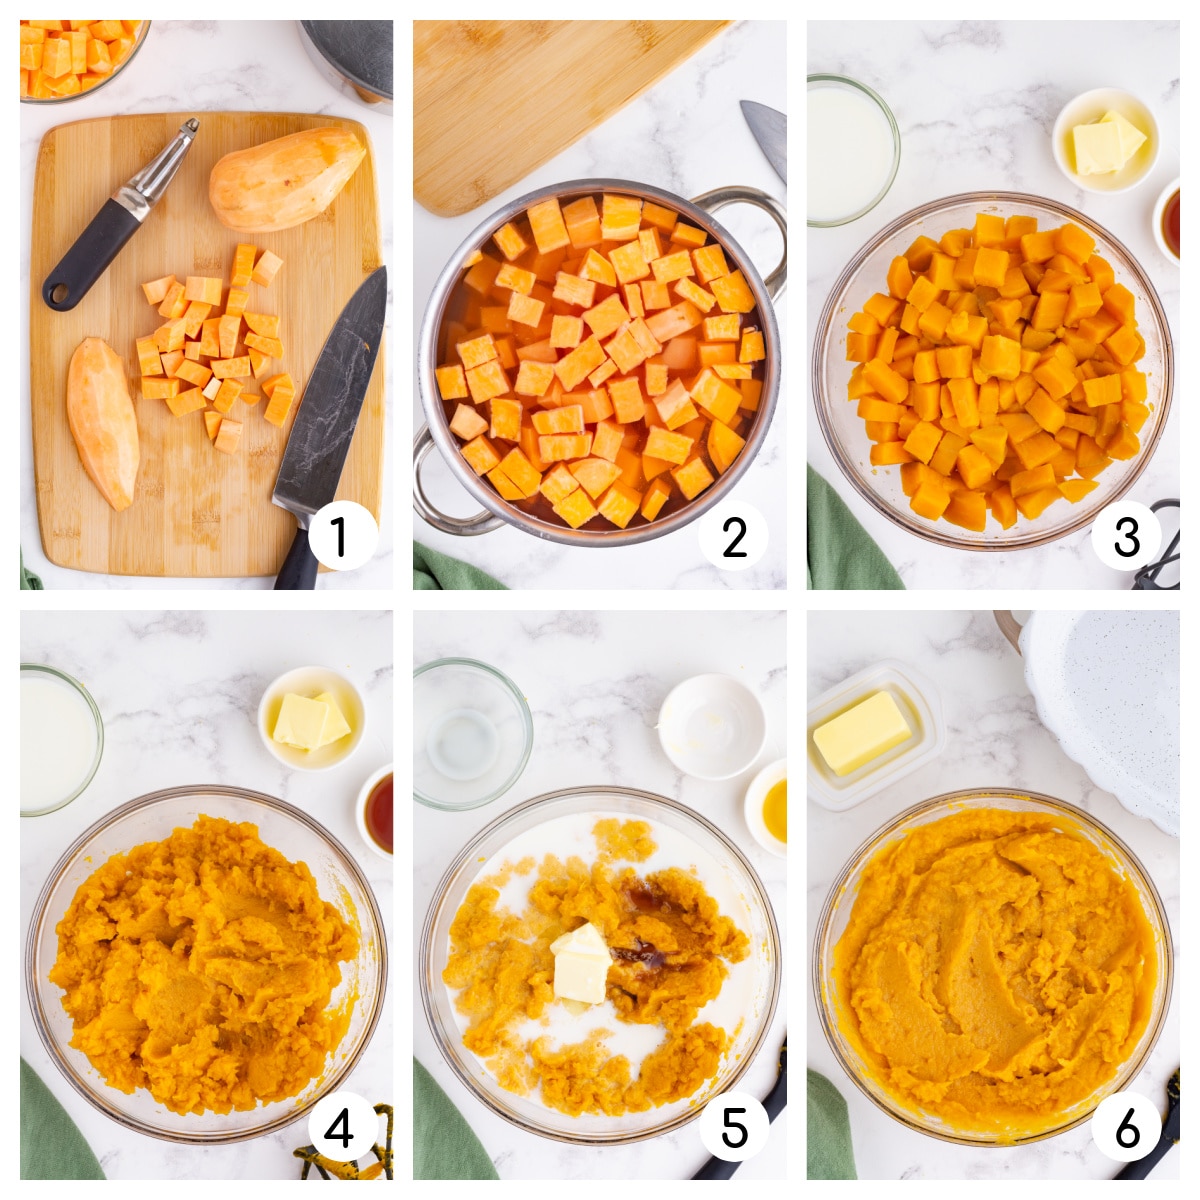 process photos for making mashed sweet potatoes